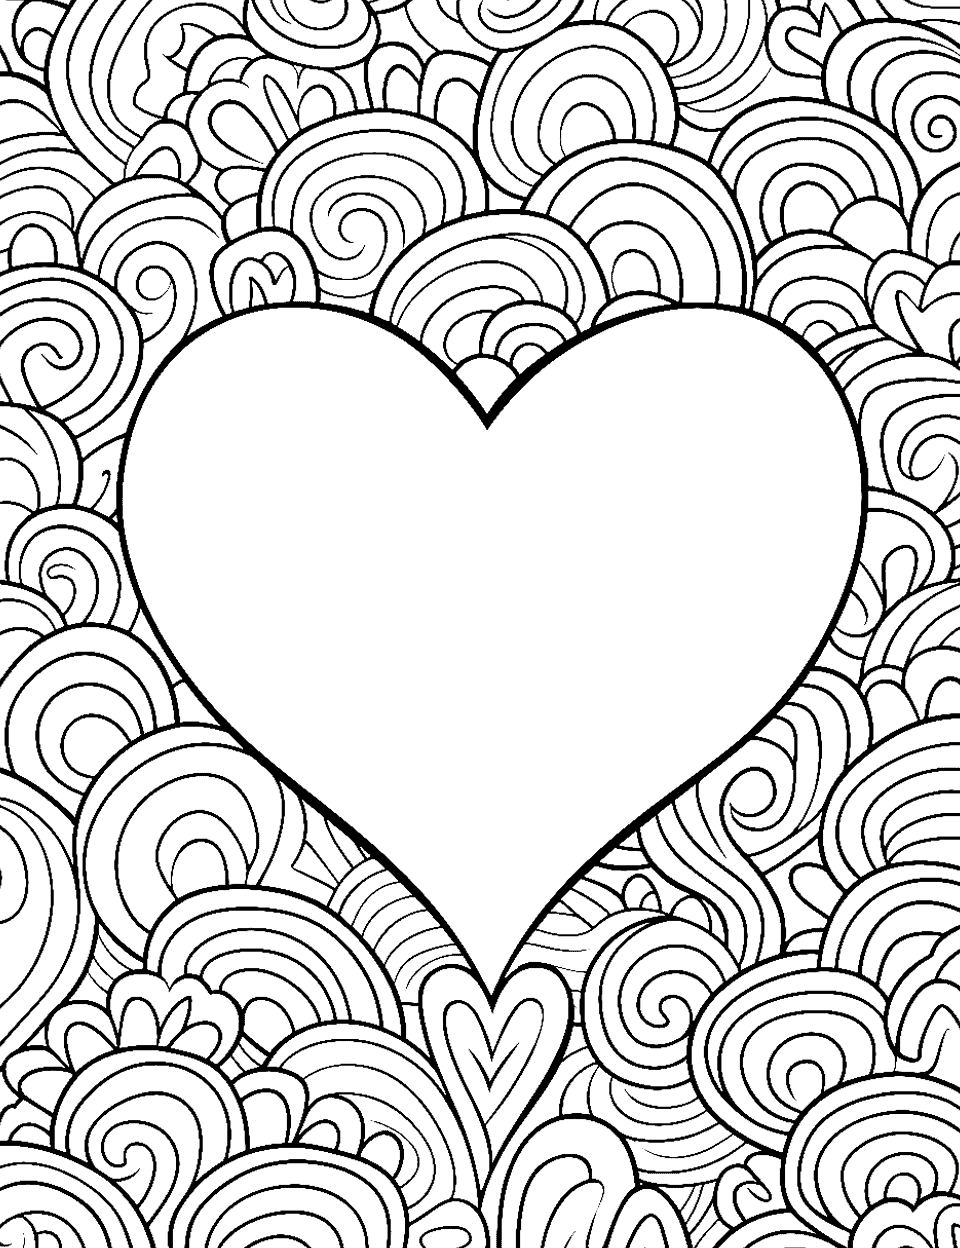 Artistic Heart Patterns Coloring Page - Geometric and swirly patterns behind a heart for adult coloring.